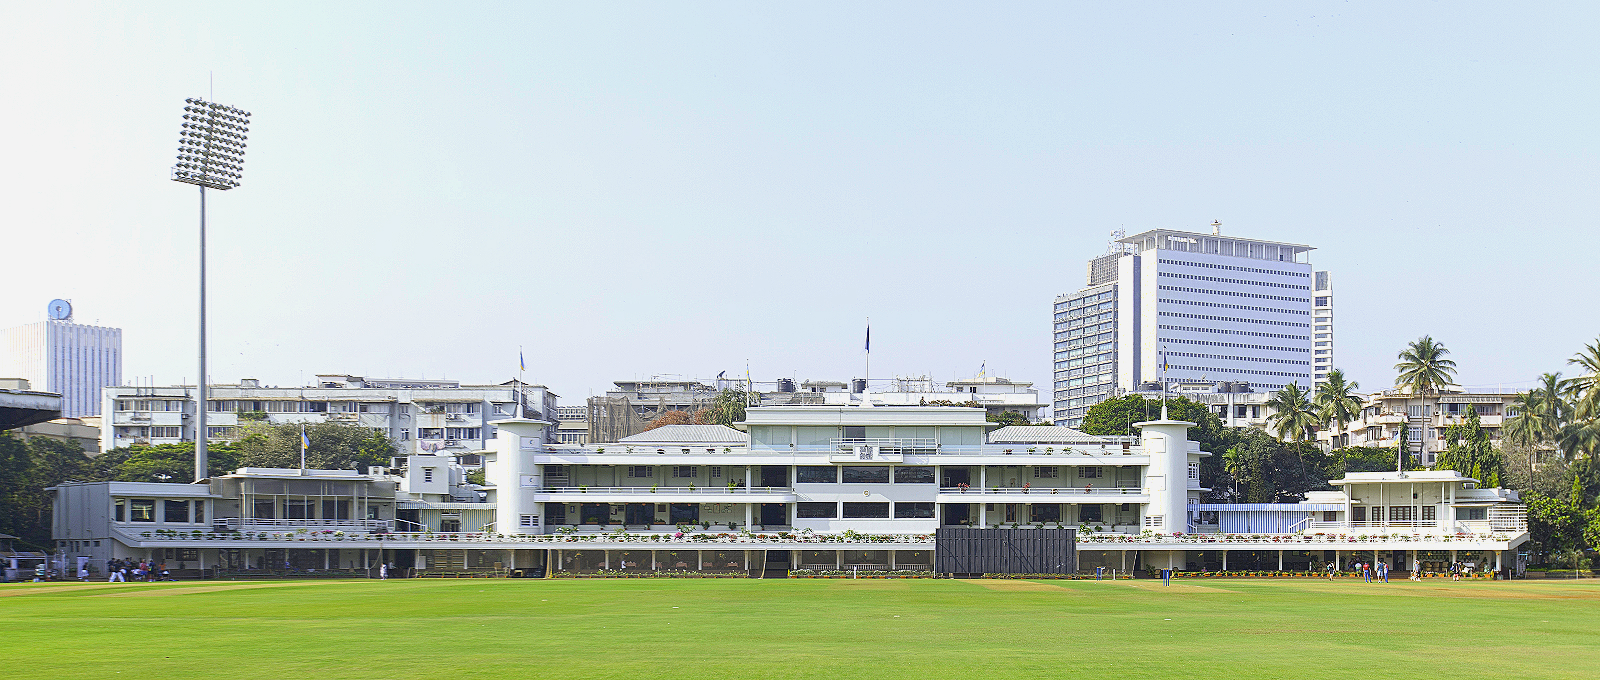 The Cricket Club Of India